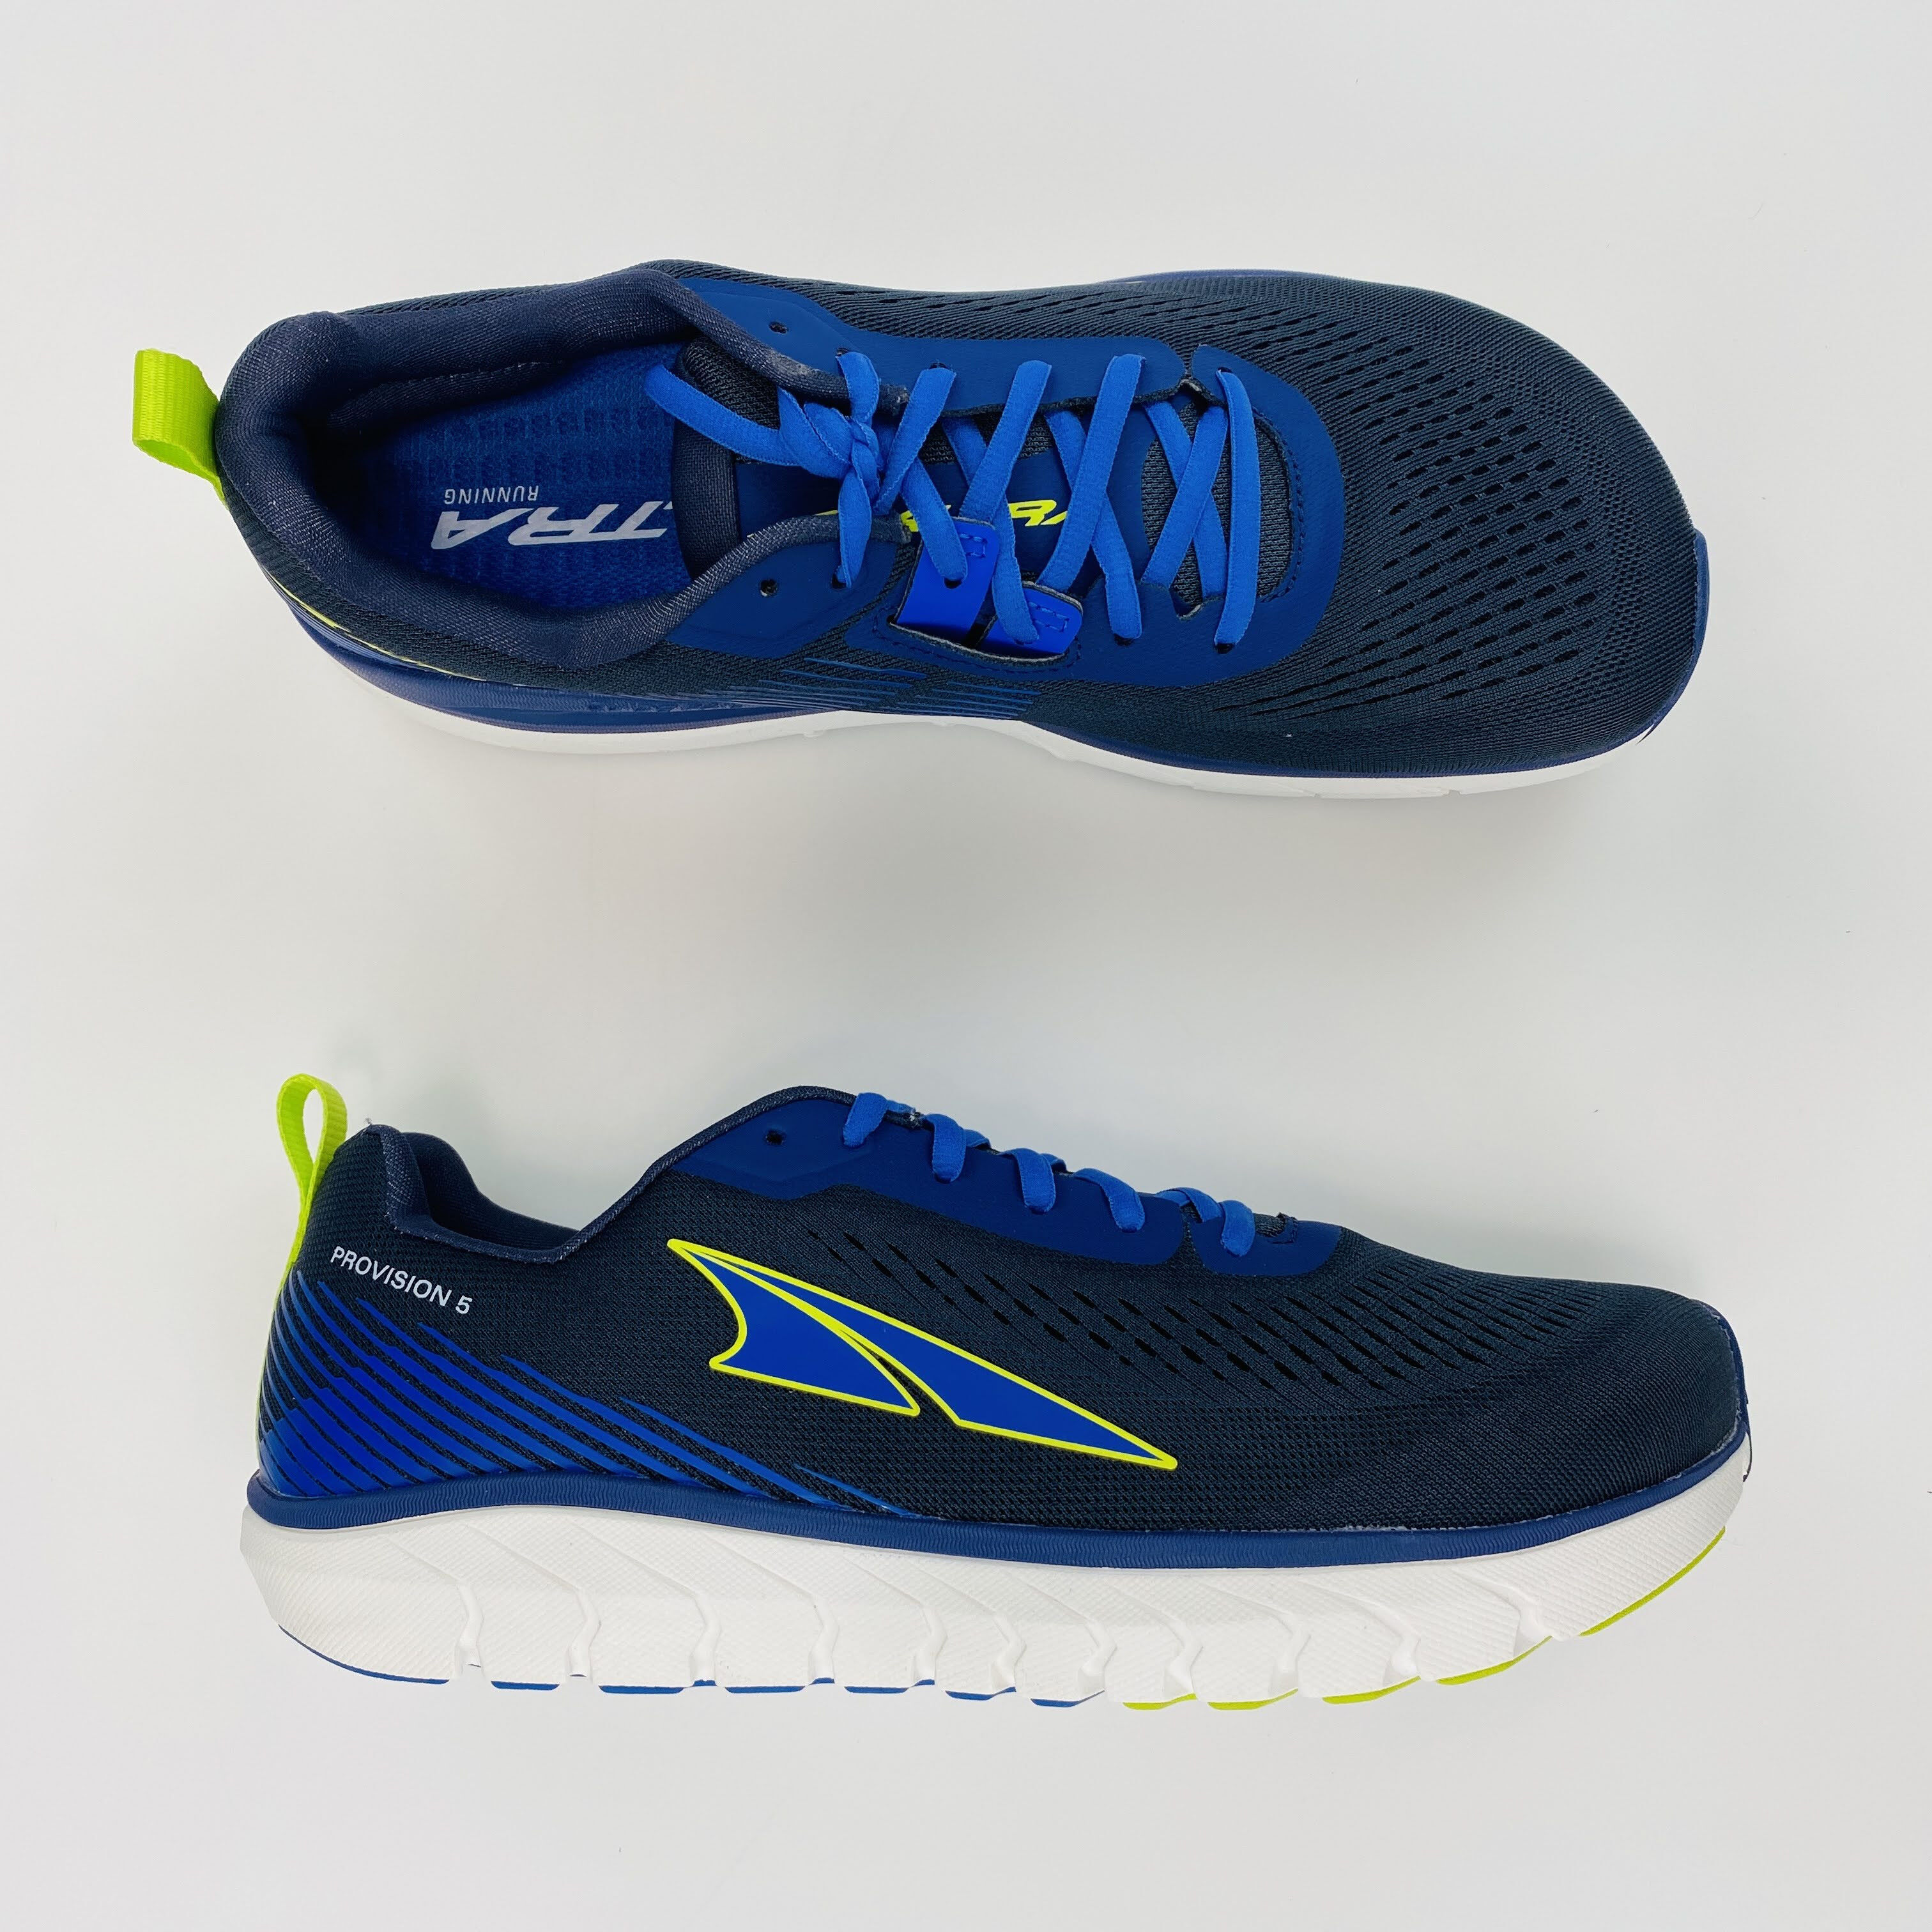 Altra M Provision 5 - Seconde main Chaussures running homme - Bleu